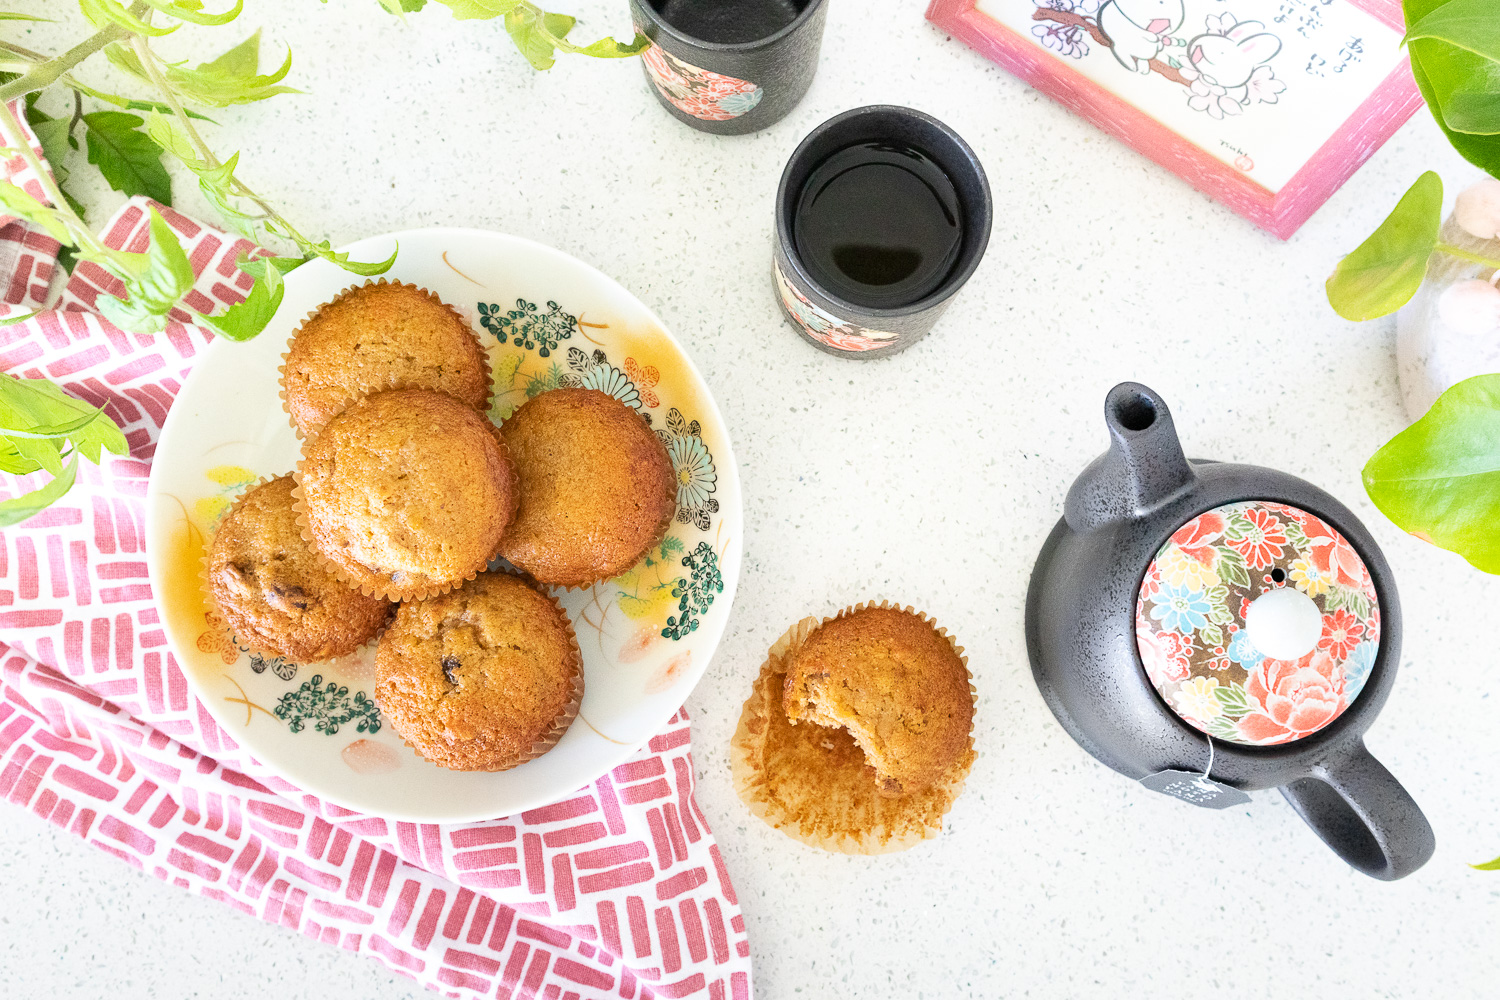 A flatlay photo of fuyu persimmon muffins on a colorful Japanese floral plate. Beneath the plate is a rose pink and white tea cloth. To the right of the plate is a muffin with a bite taken out of it and a Japanese tea pot and cup. There are also some green plants and a photo of bunnies poking into the frame.